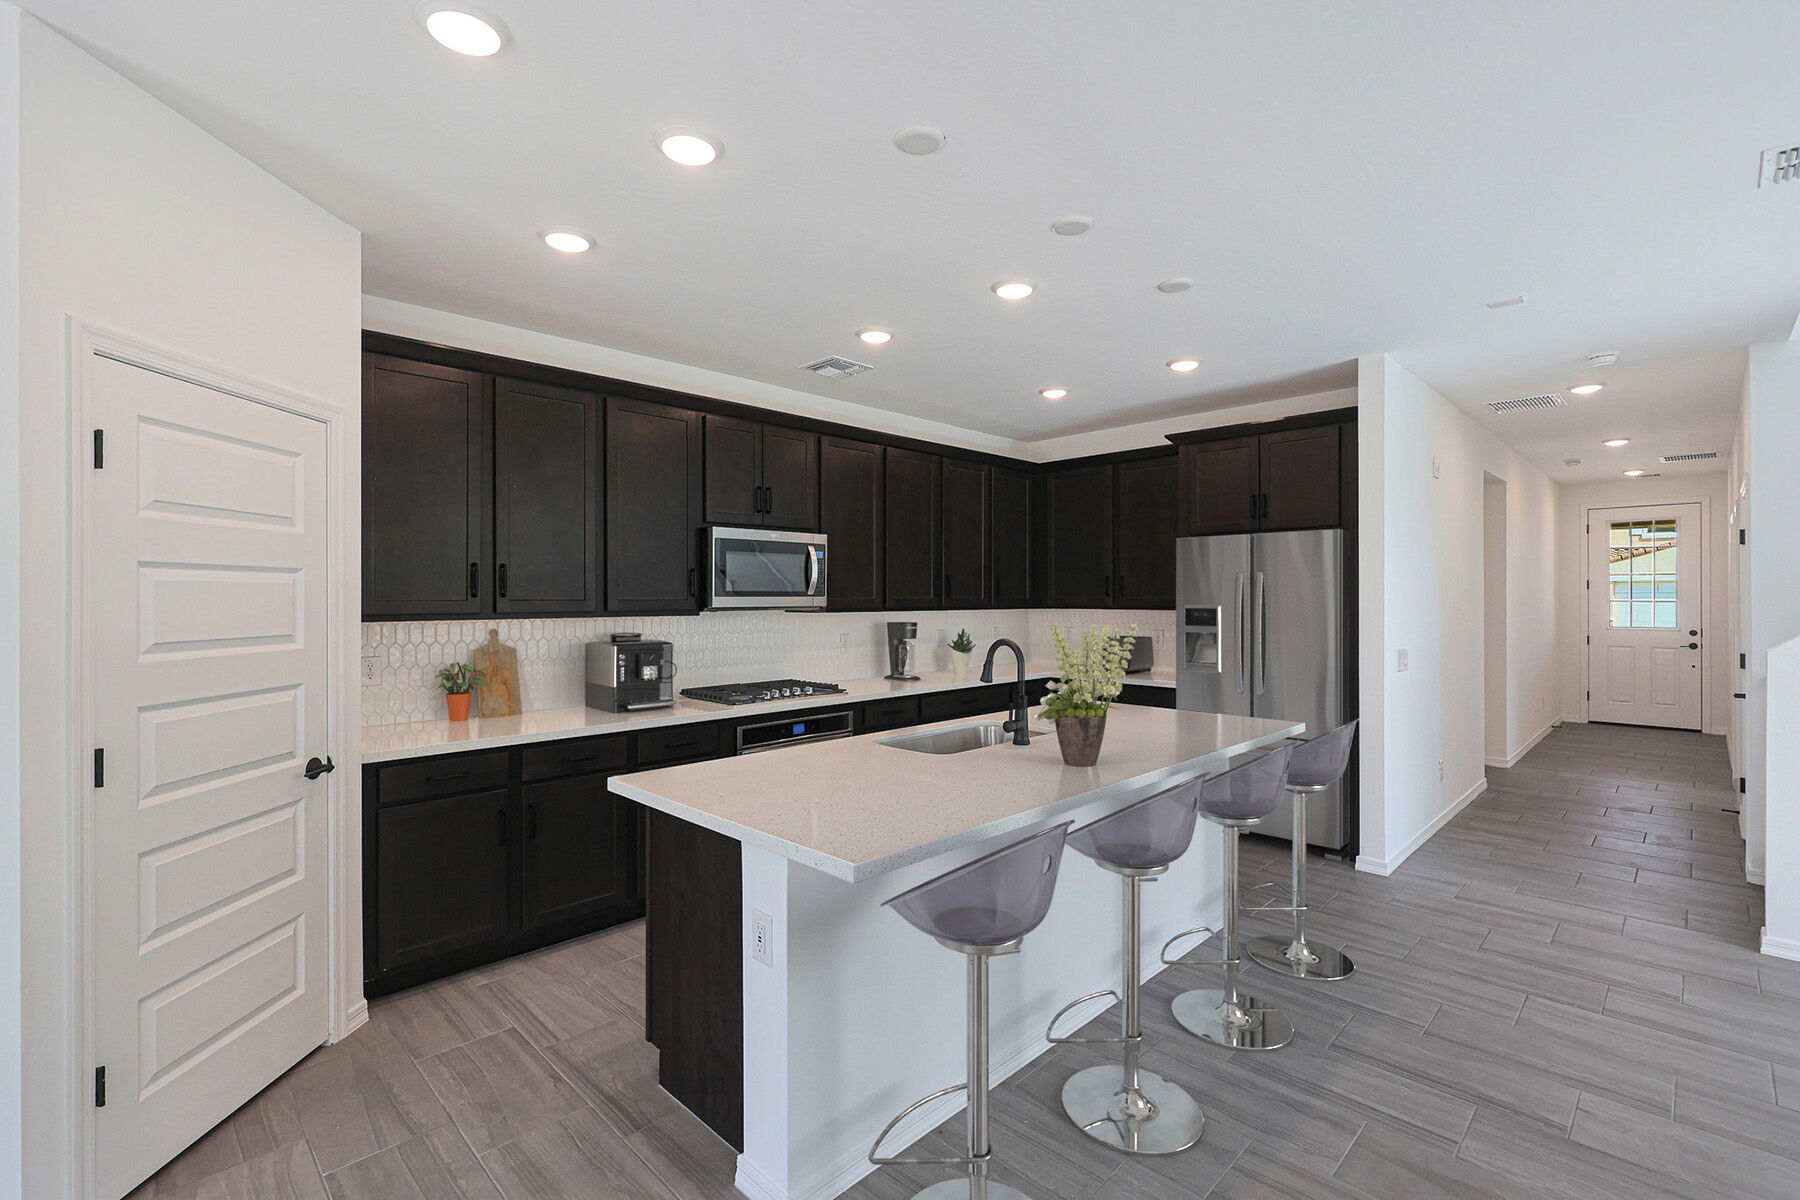 L-Shaped Kitchen with door, refrigerator, cooktop, dark wood cabinets and wood flooring